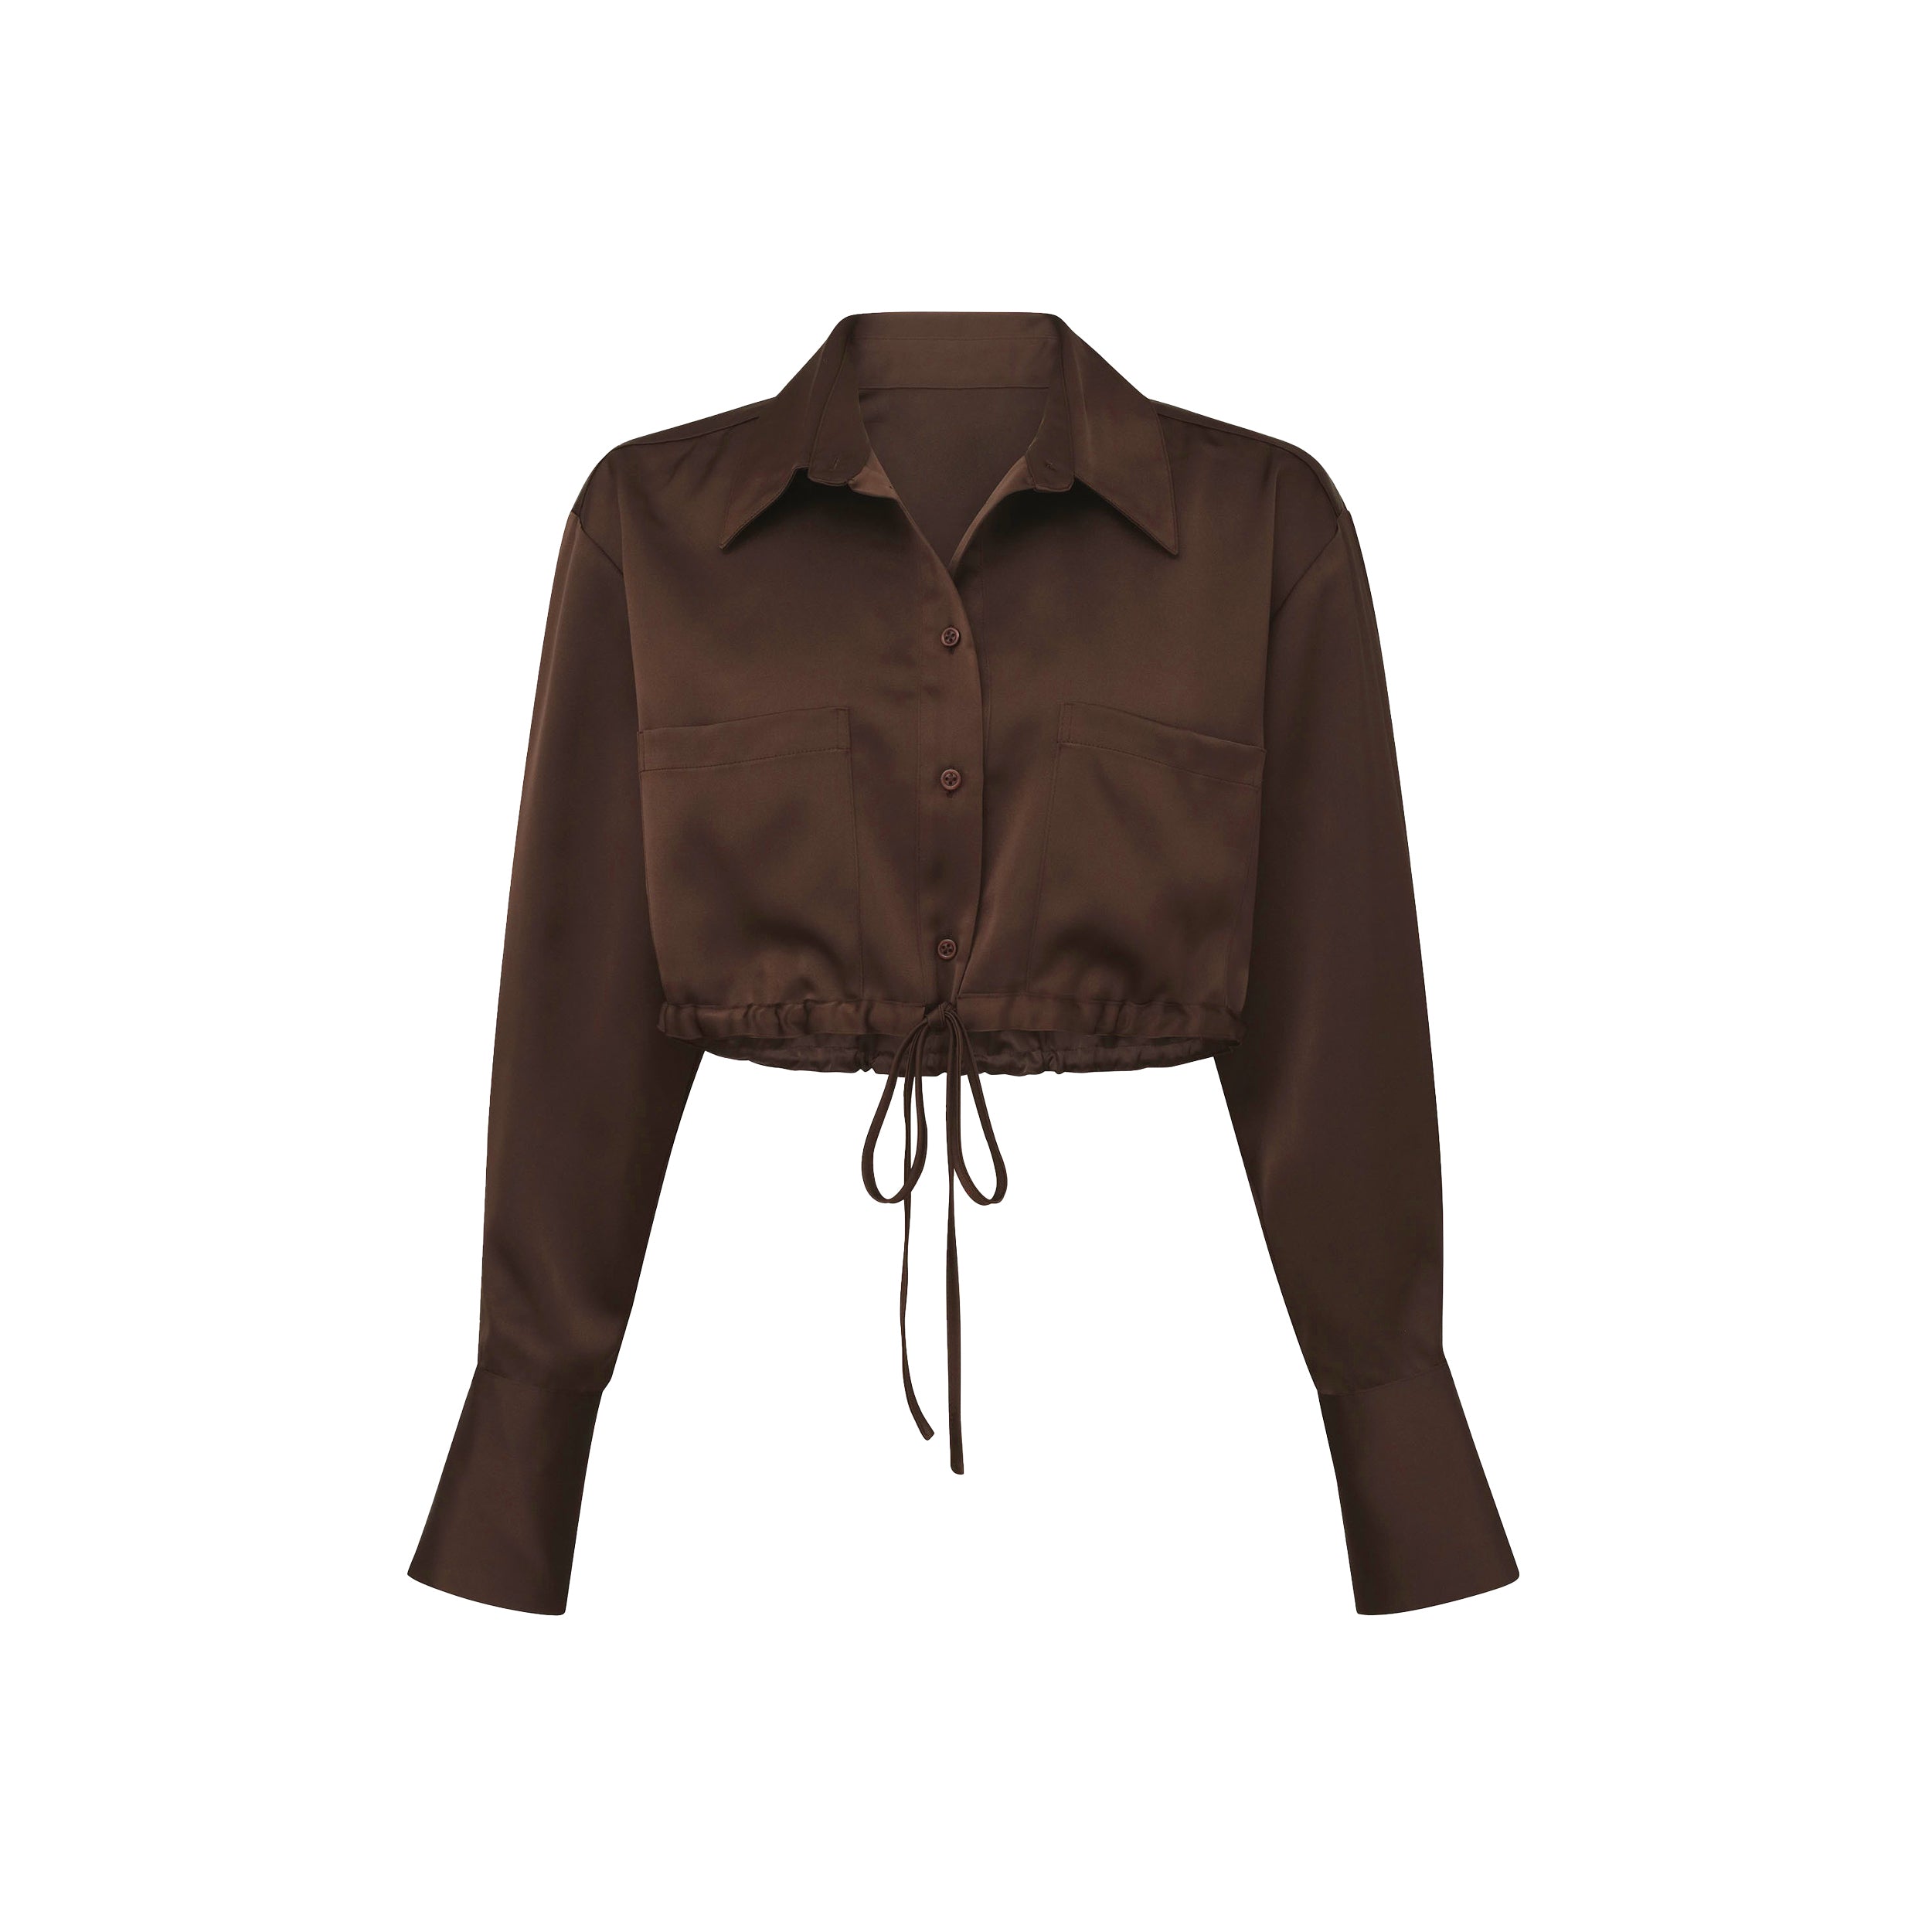 Product view of brown Milan Satin Button Up features luxurious and structured satin-like fabric, featuring cargo detailing, shell buttons and a tie-waist